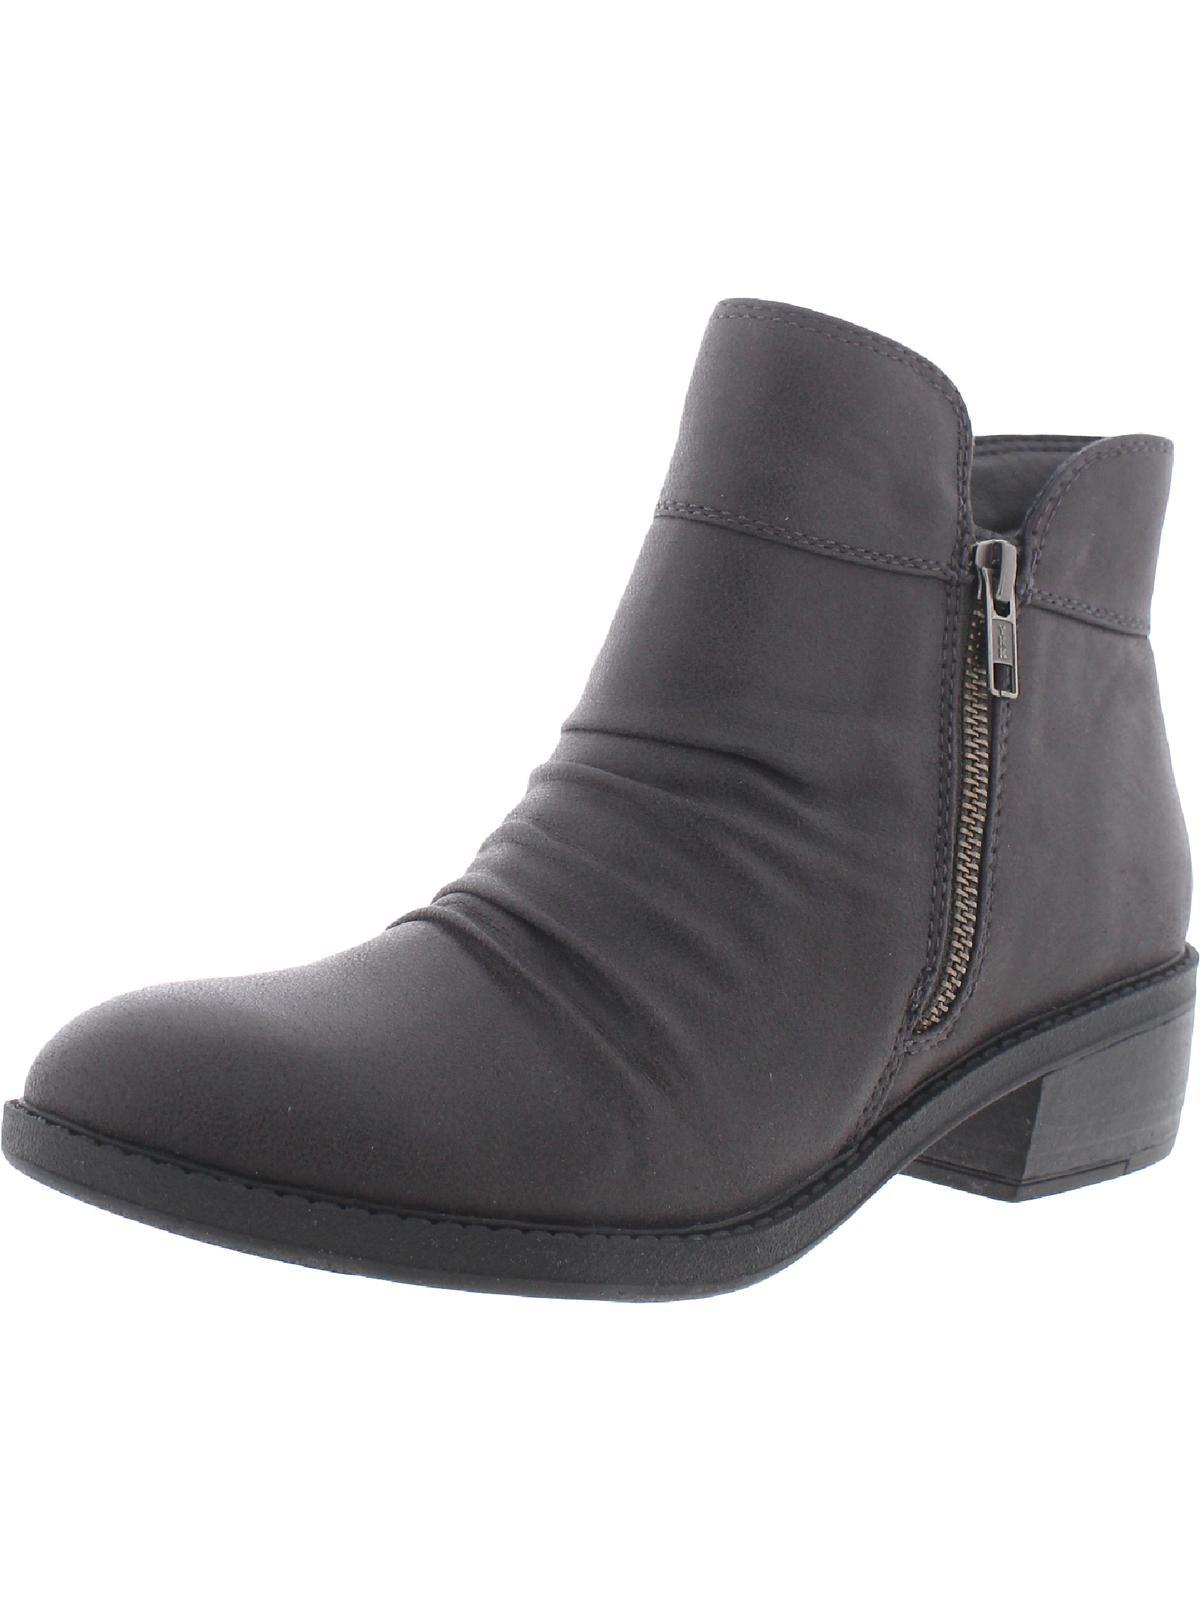 BareTraps Sam Zipper Casual Ankle Boots in Gray | Lyst